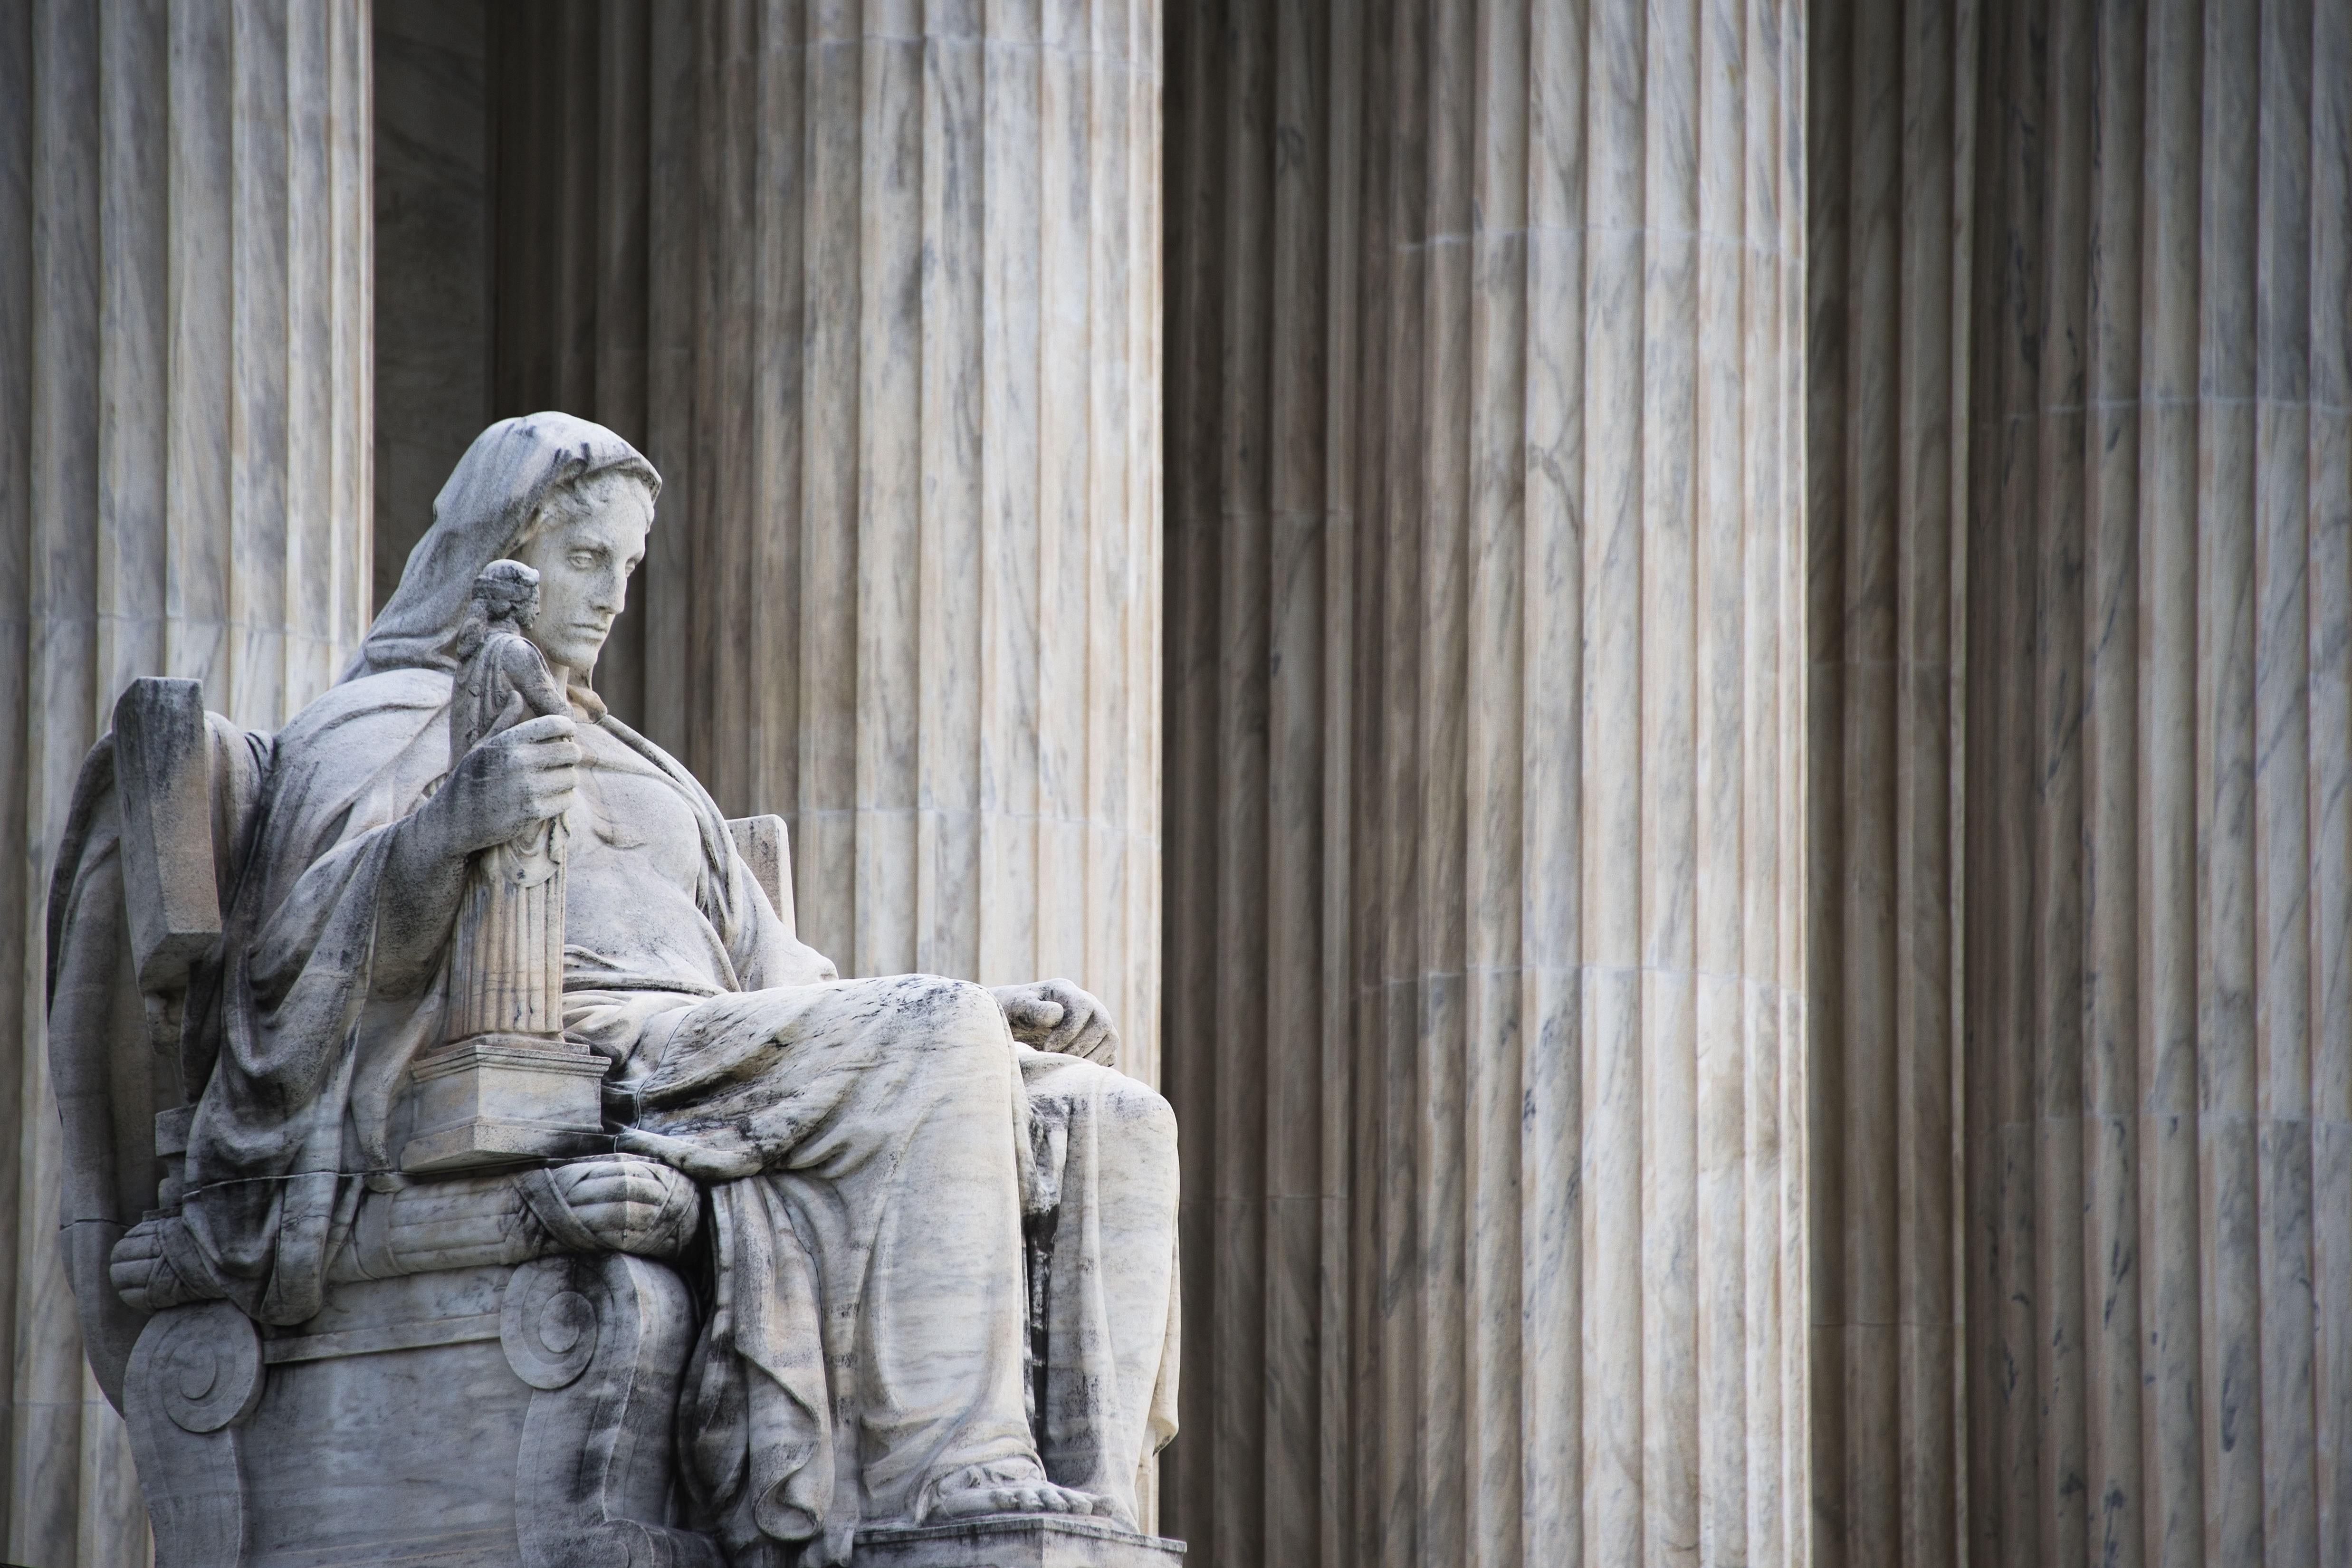 The statue of Contemplation of Justice at the United States Supreme court.